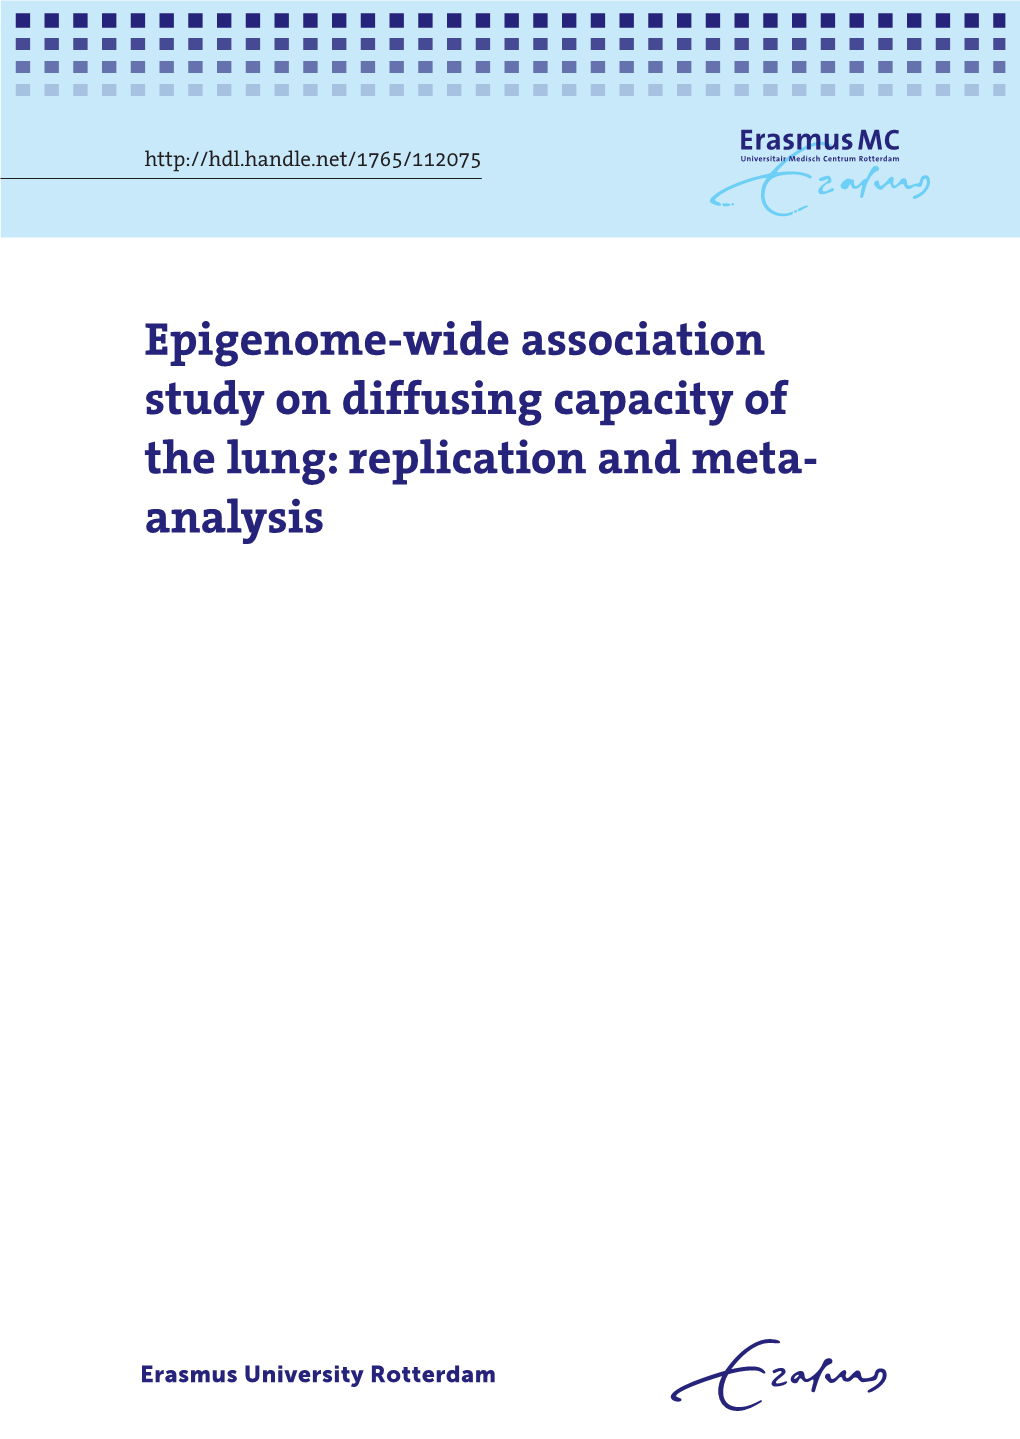 Epigenome-Wide Association Study on Diffusing Capacity of the Lung: Replication and Meta- Analysis